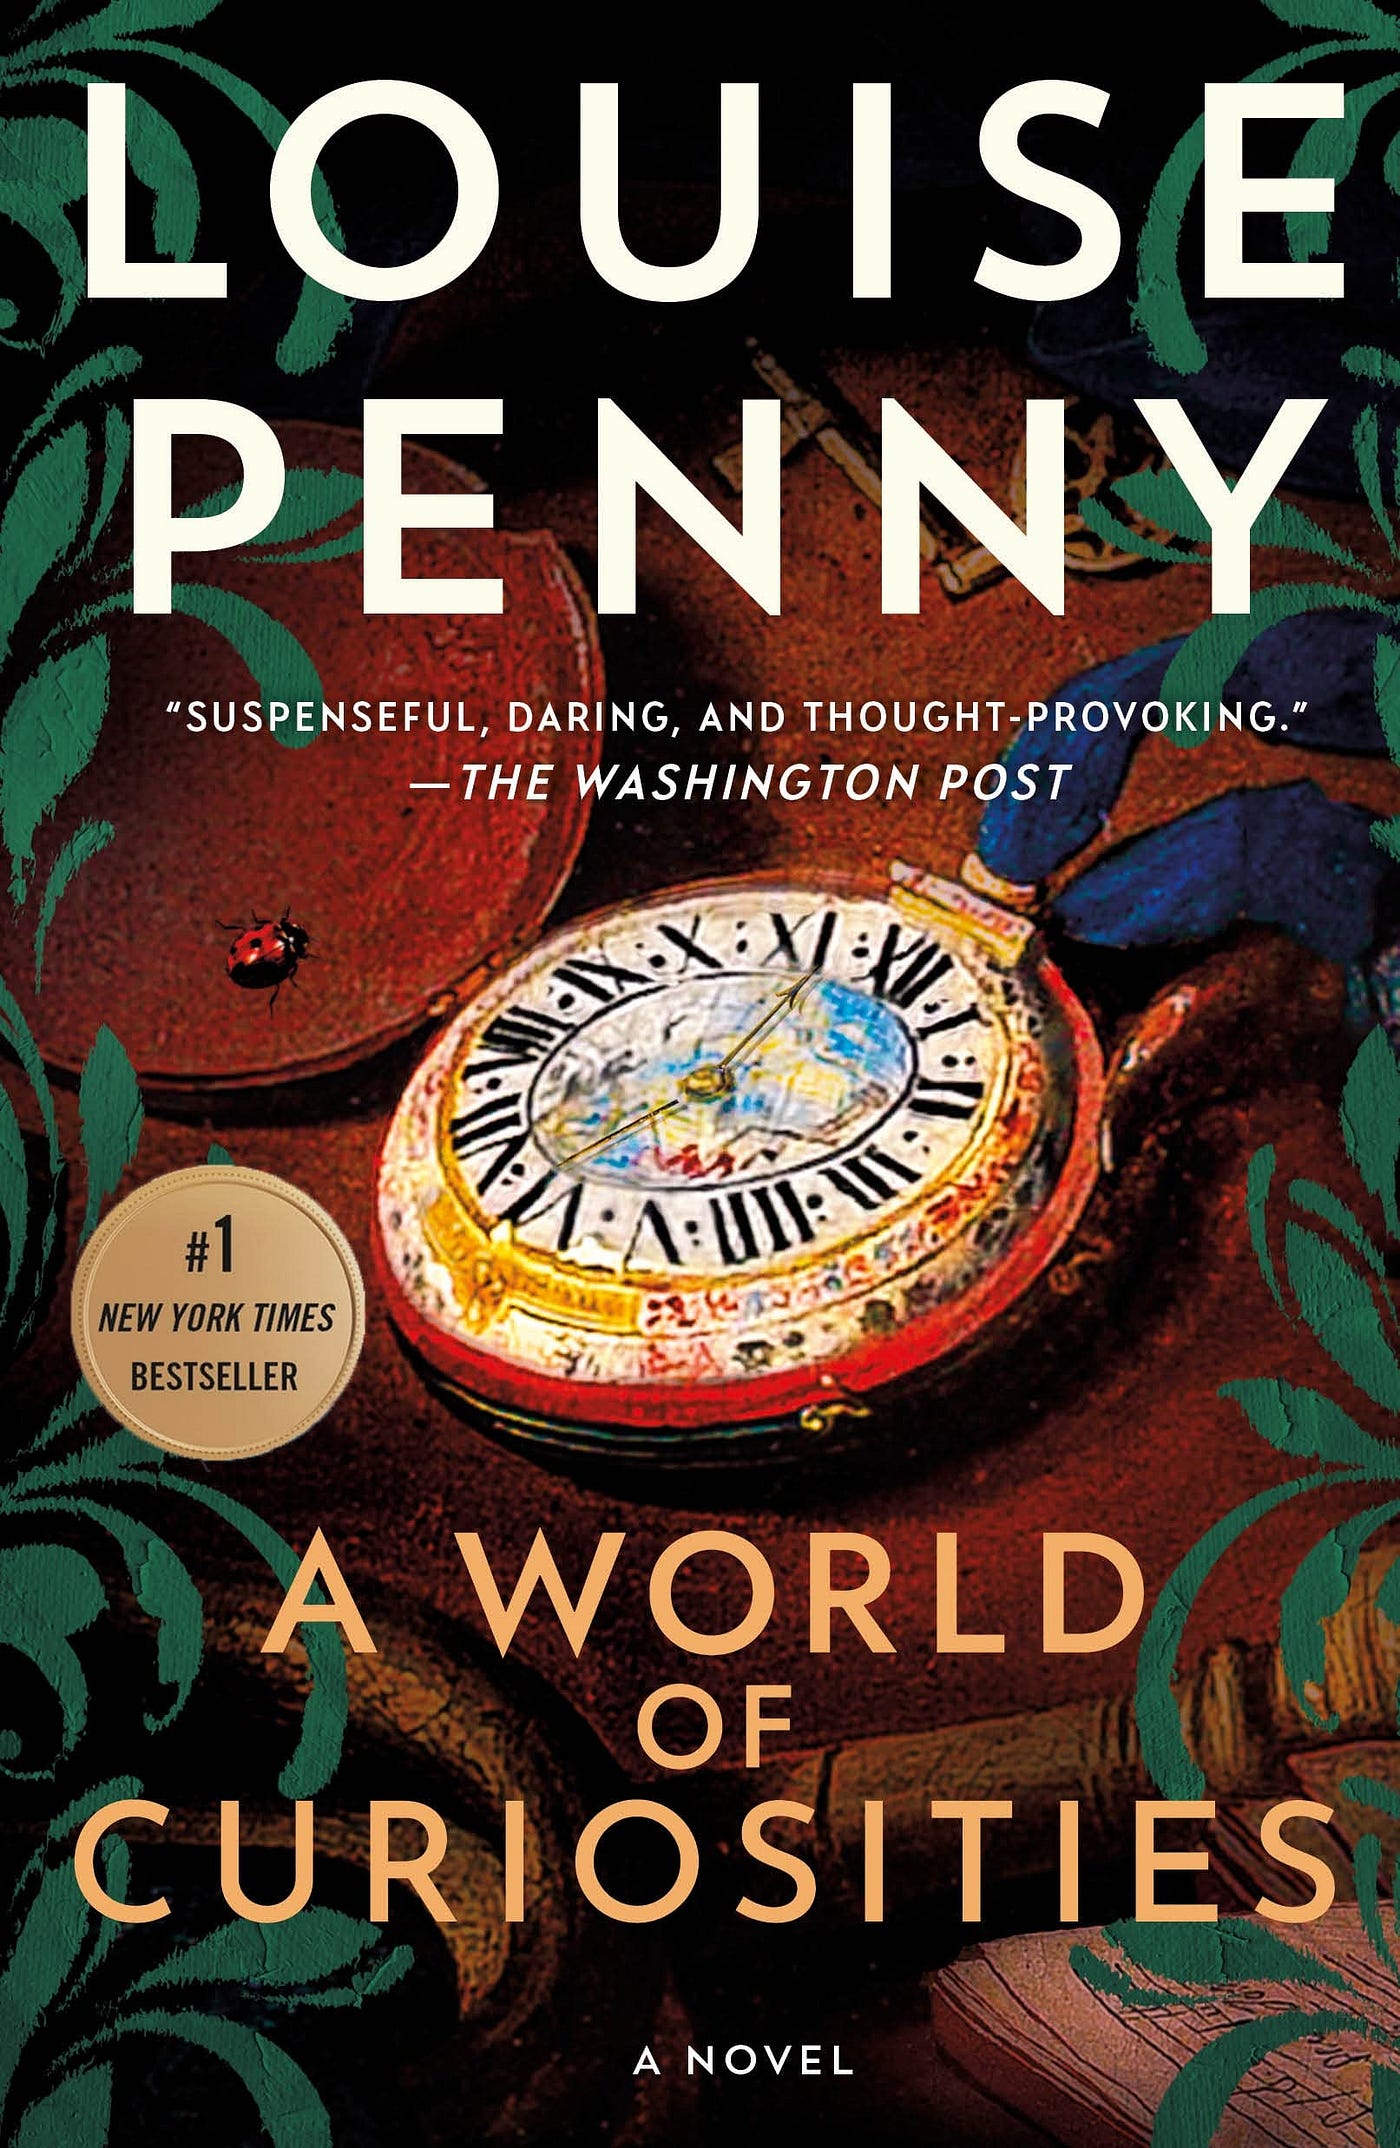 Every Single Louise Penny Books In Order, With Summaries!